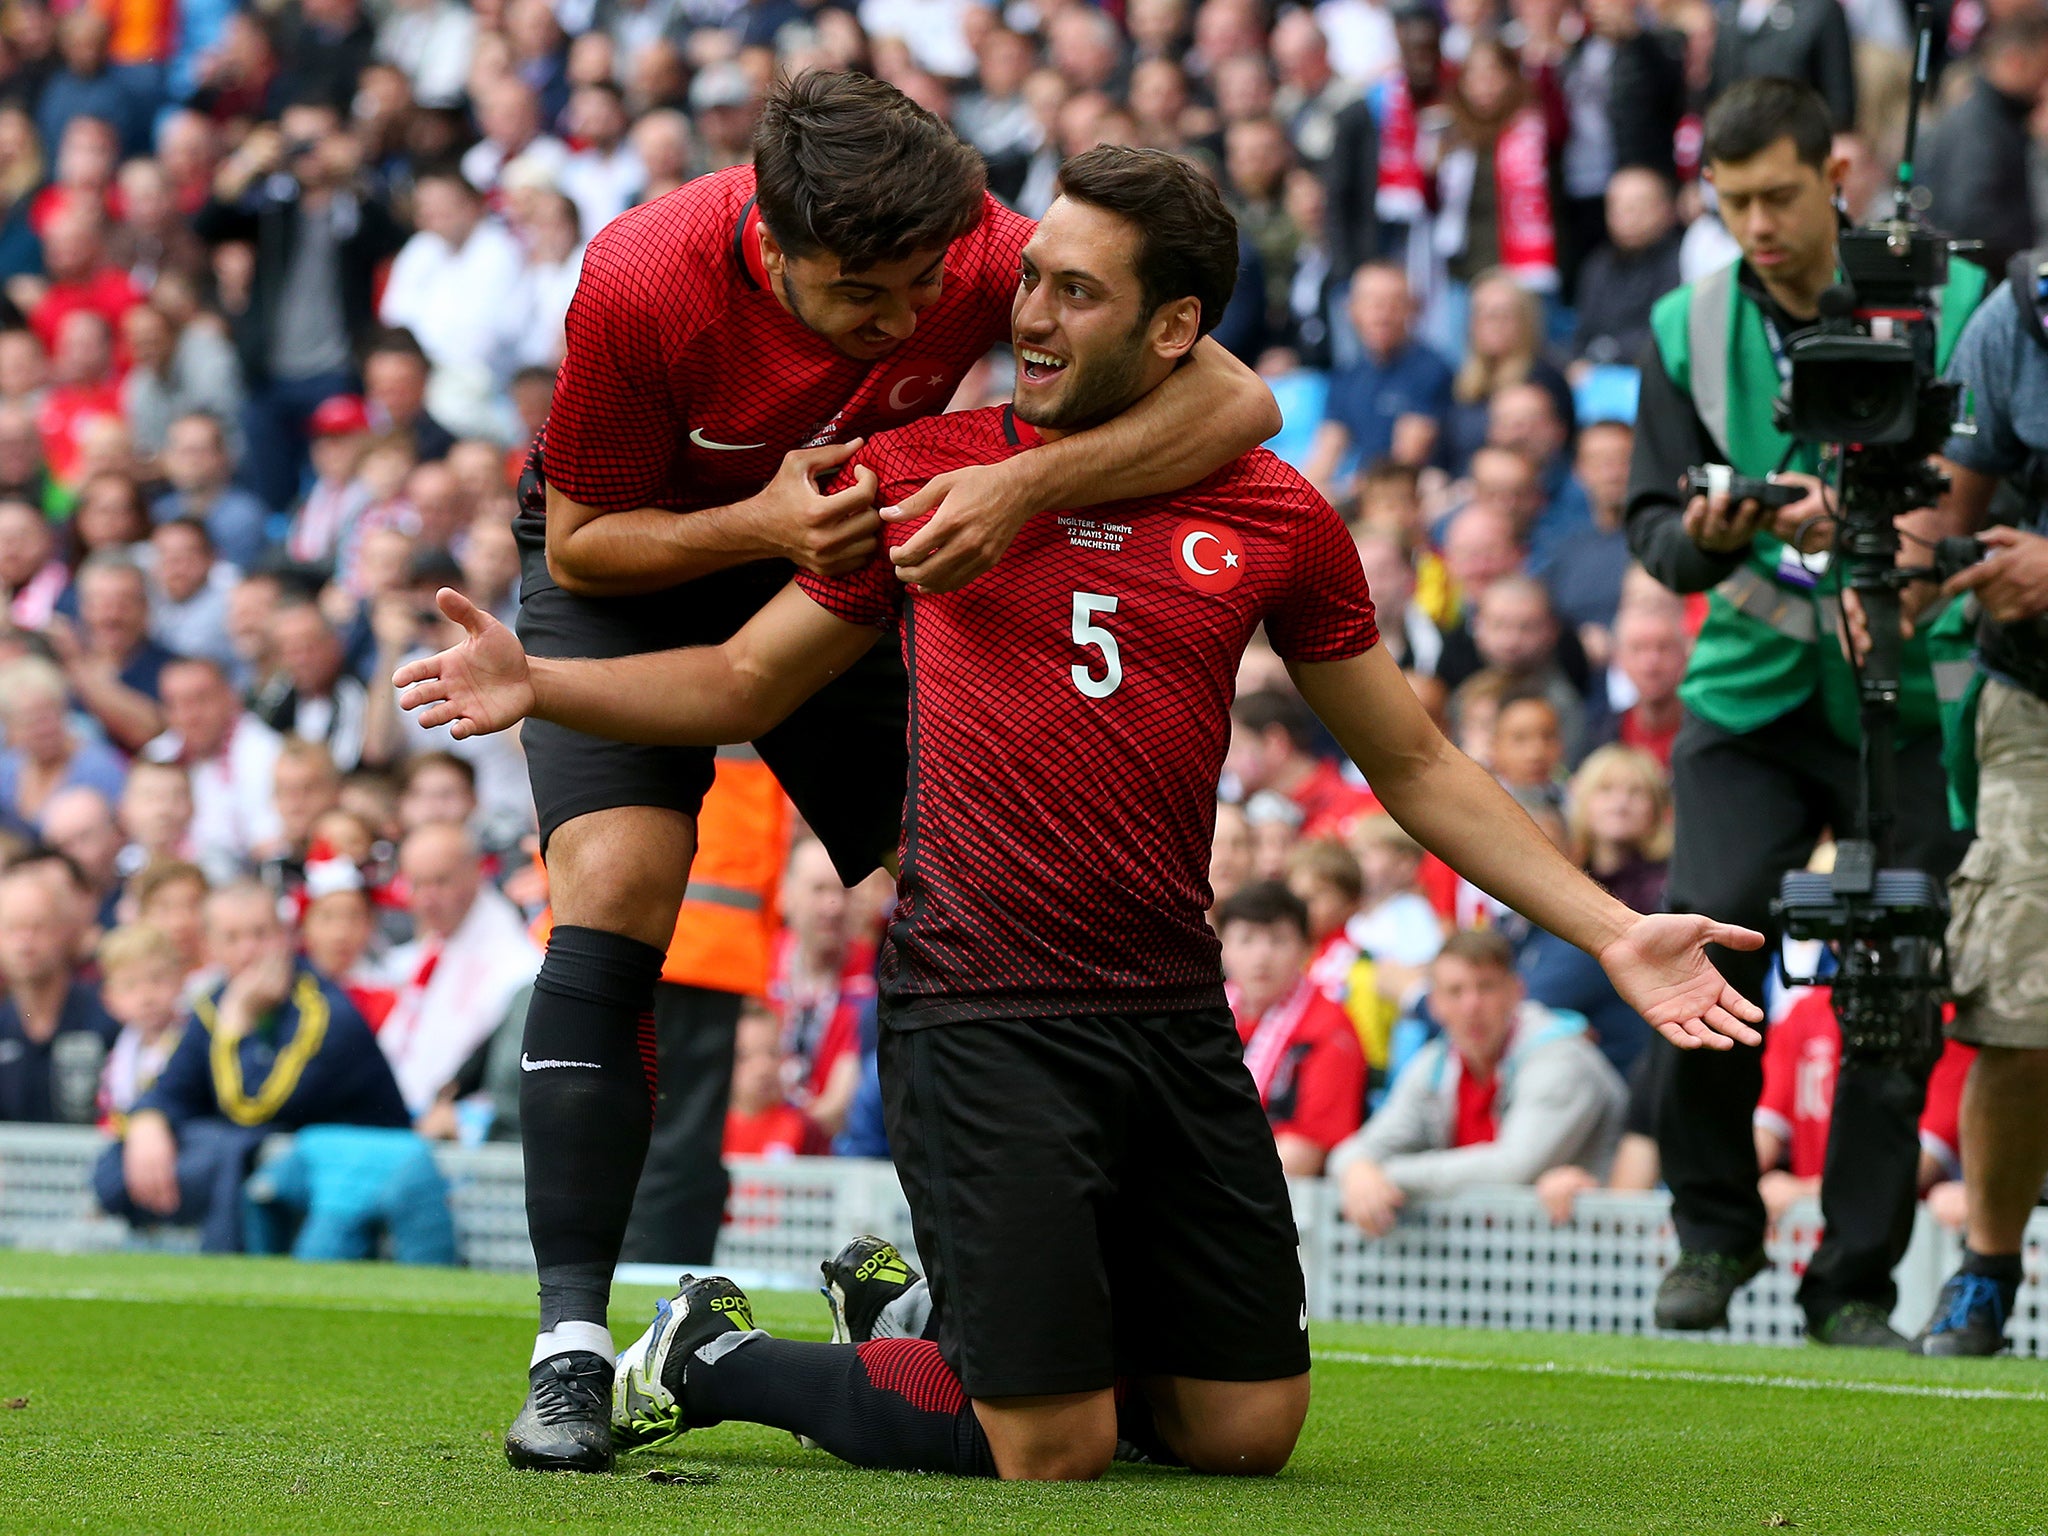 Calhanoglu tapped home from close range for Turkey's equaliser